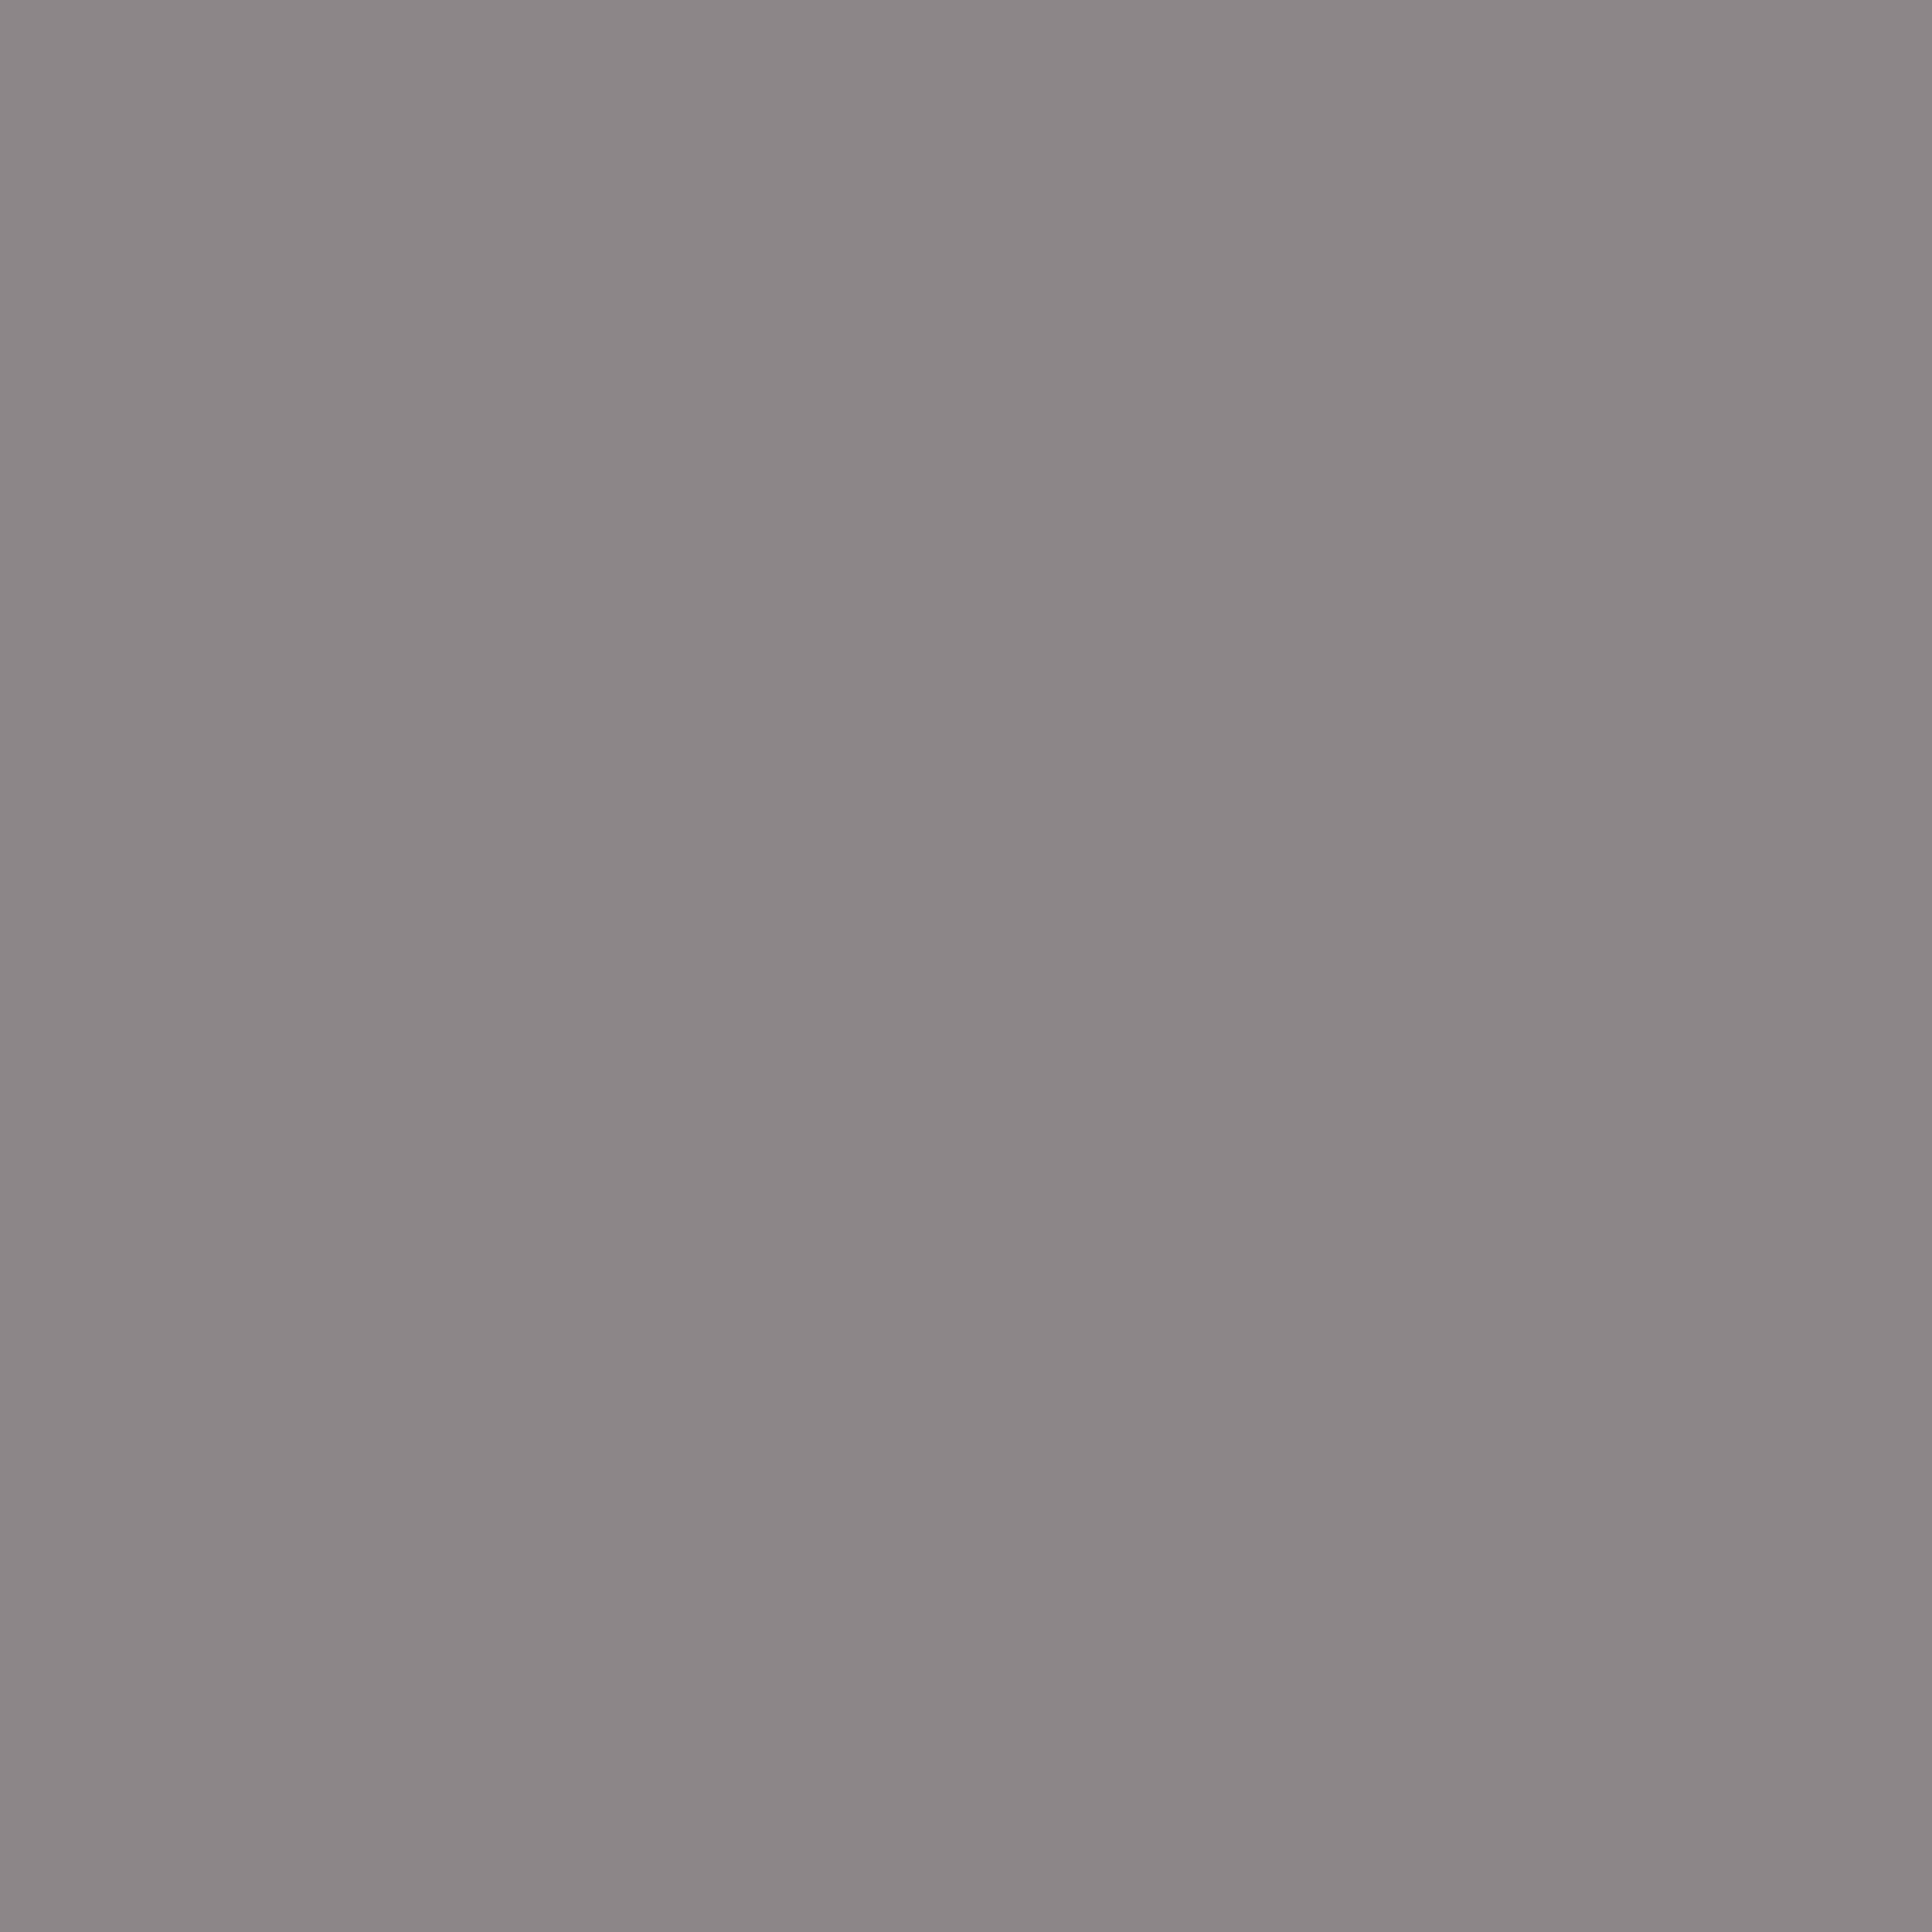 2732x2732 Taupe Gray Solid Color Background